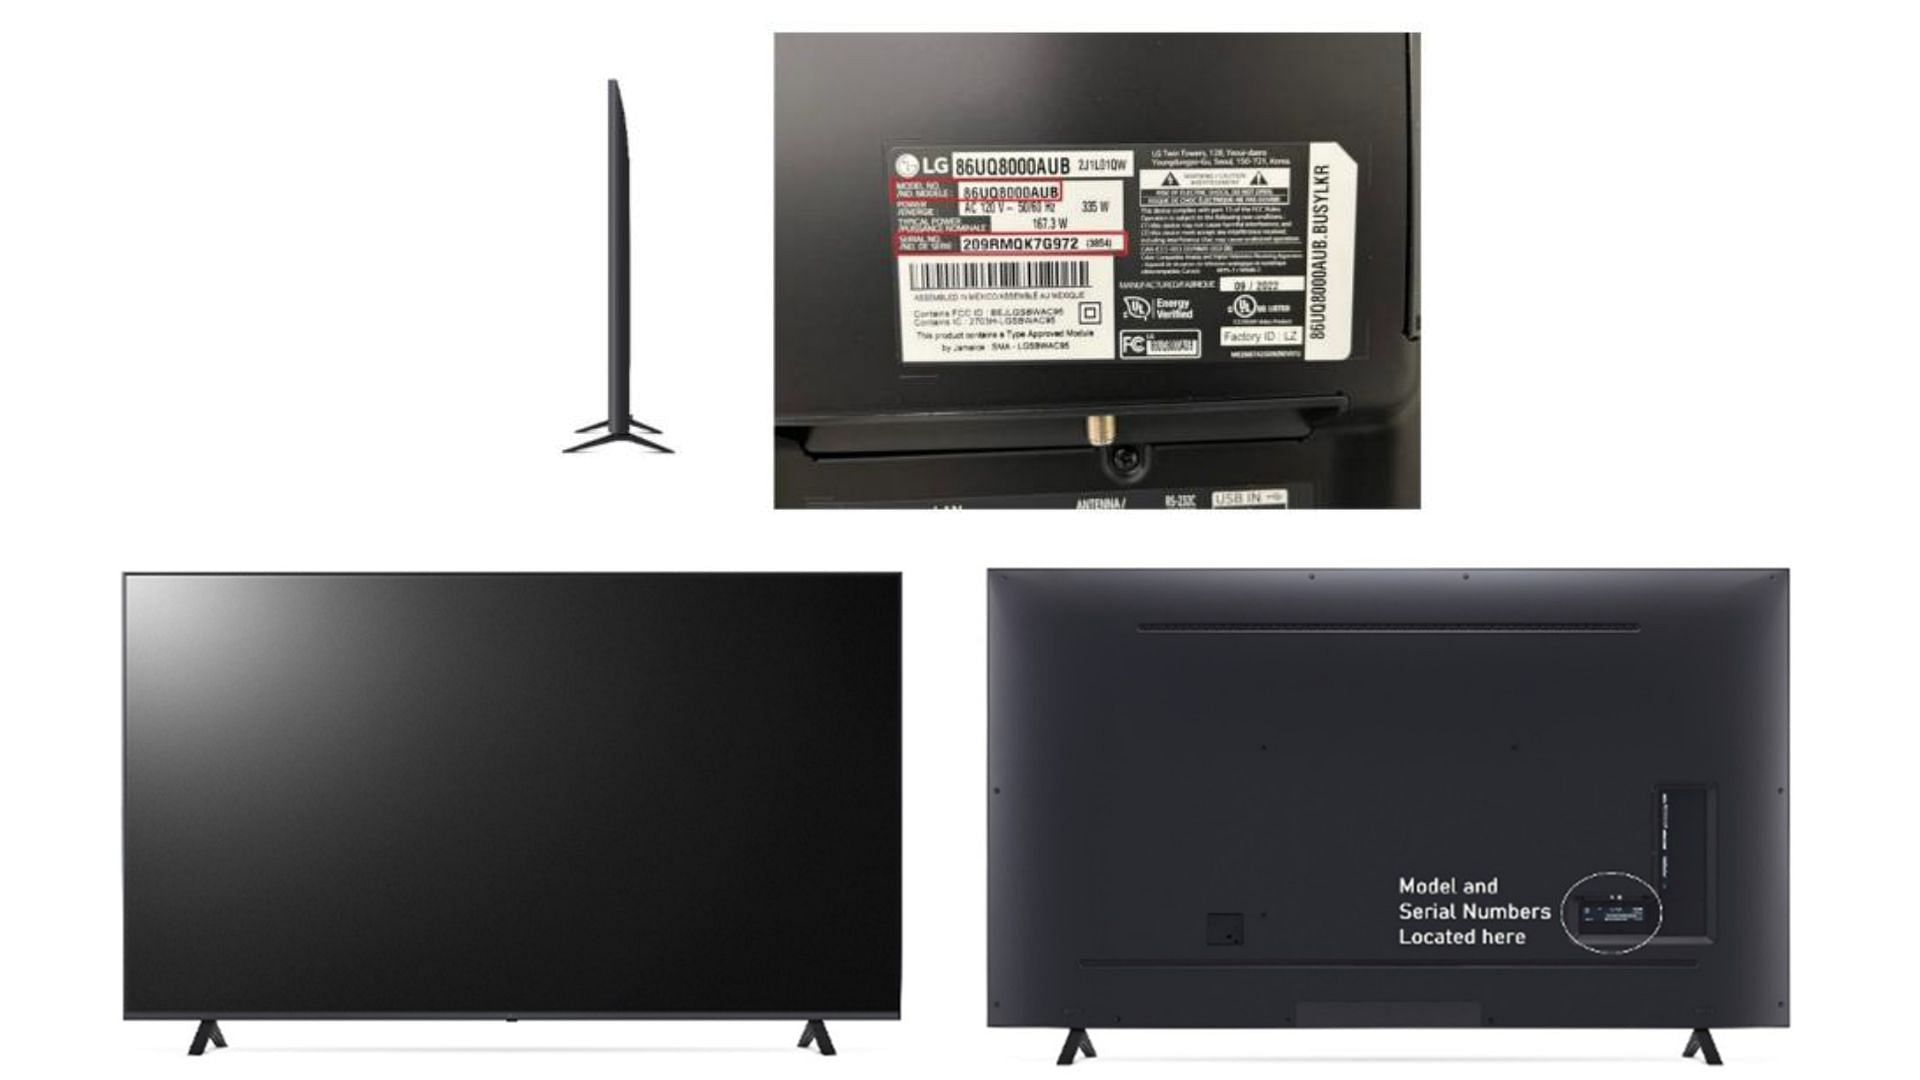 the recalled 86-inch free-standing televisions and stands have the affected model and serial number printed on the label on the back of the LG Electronics TVs (Image via CPSC)